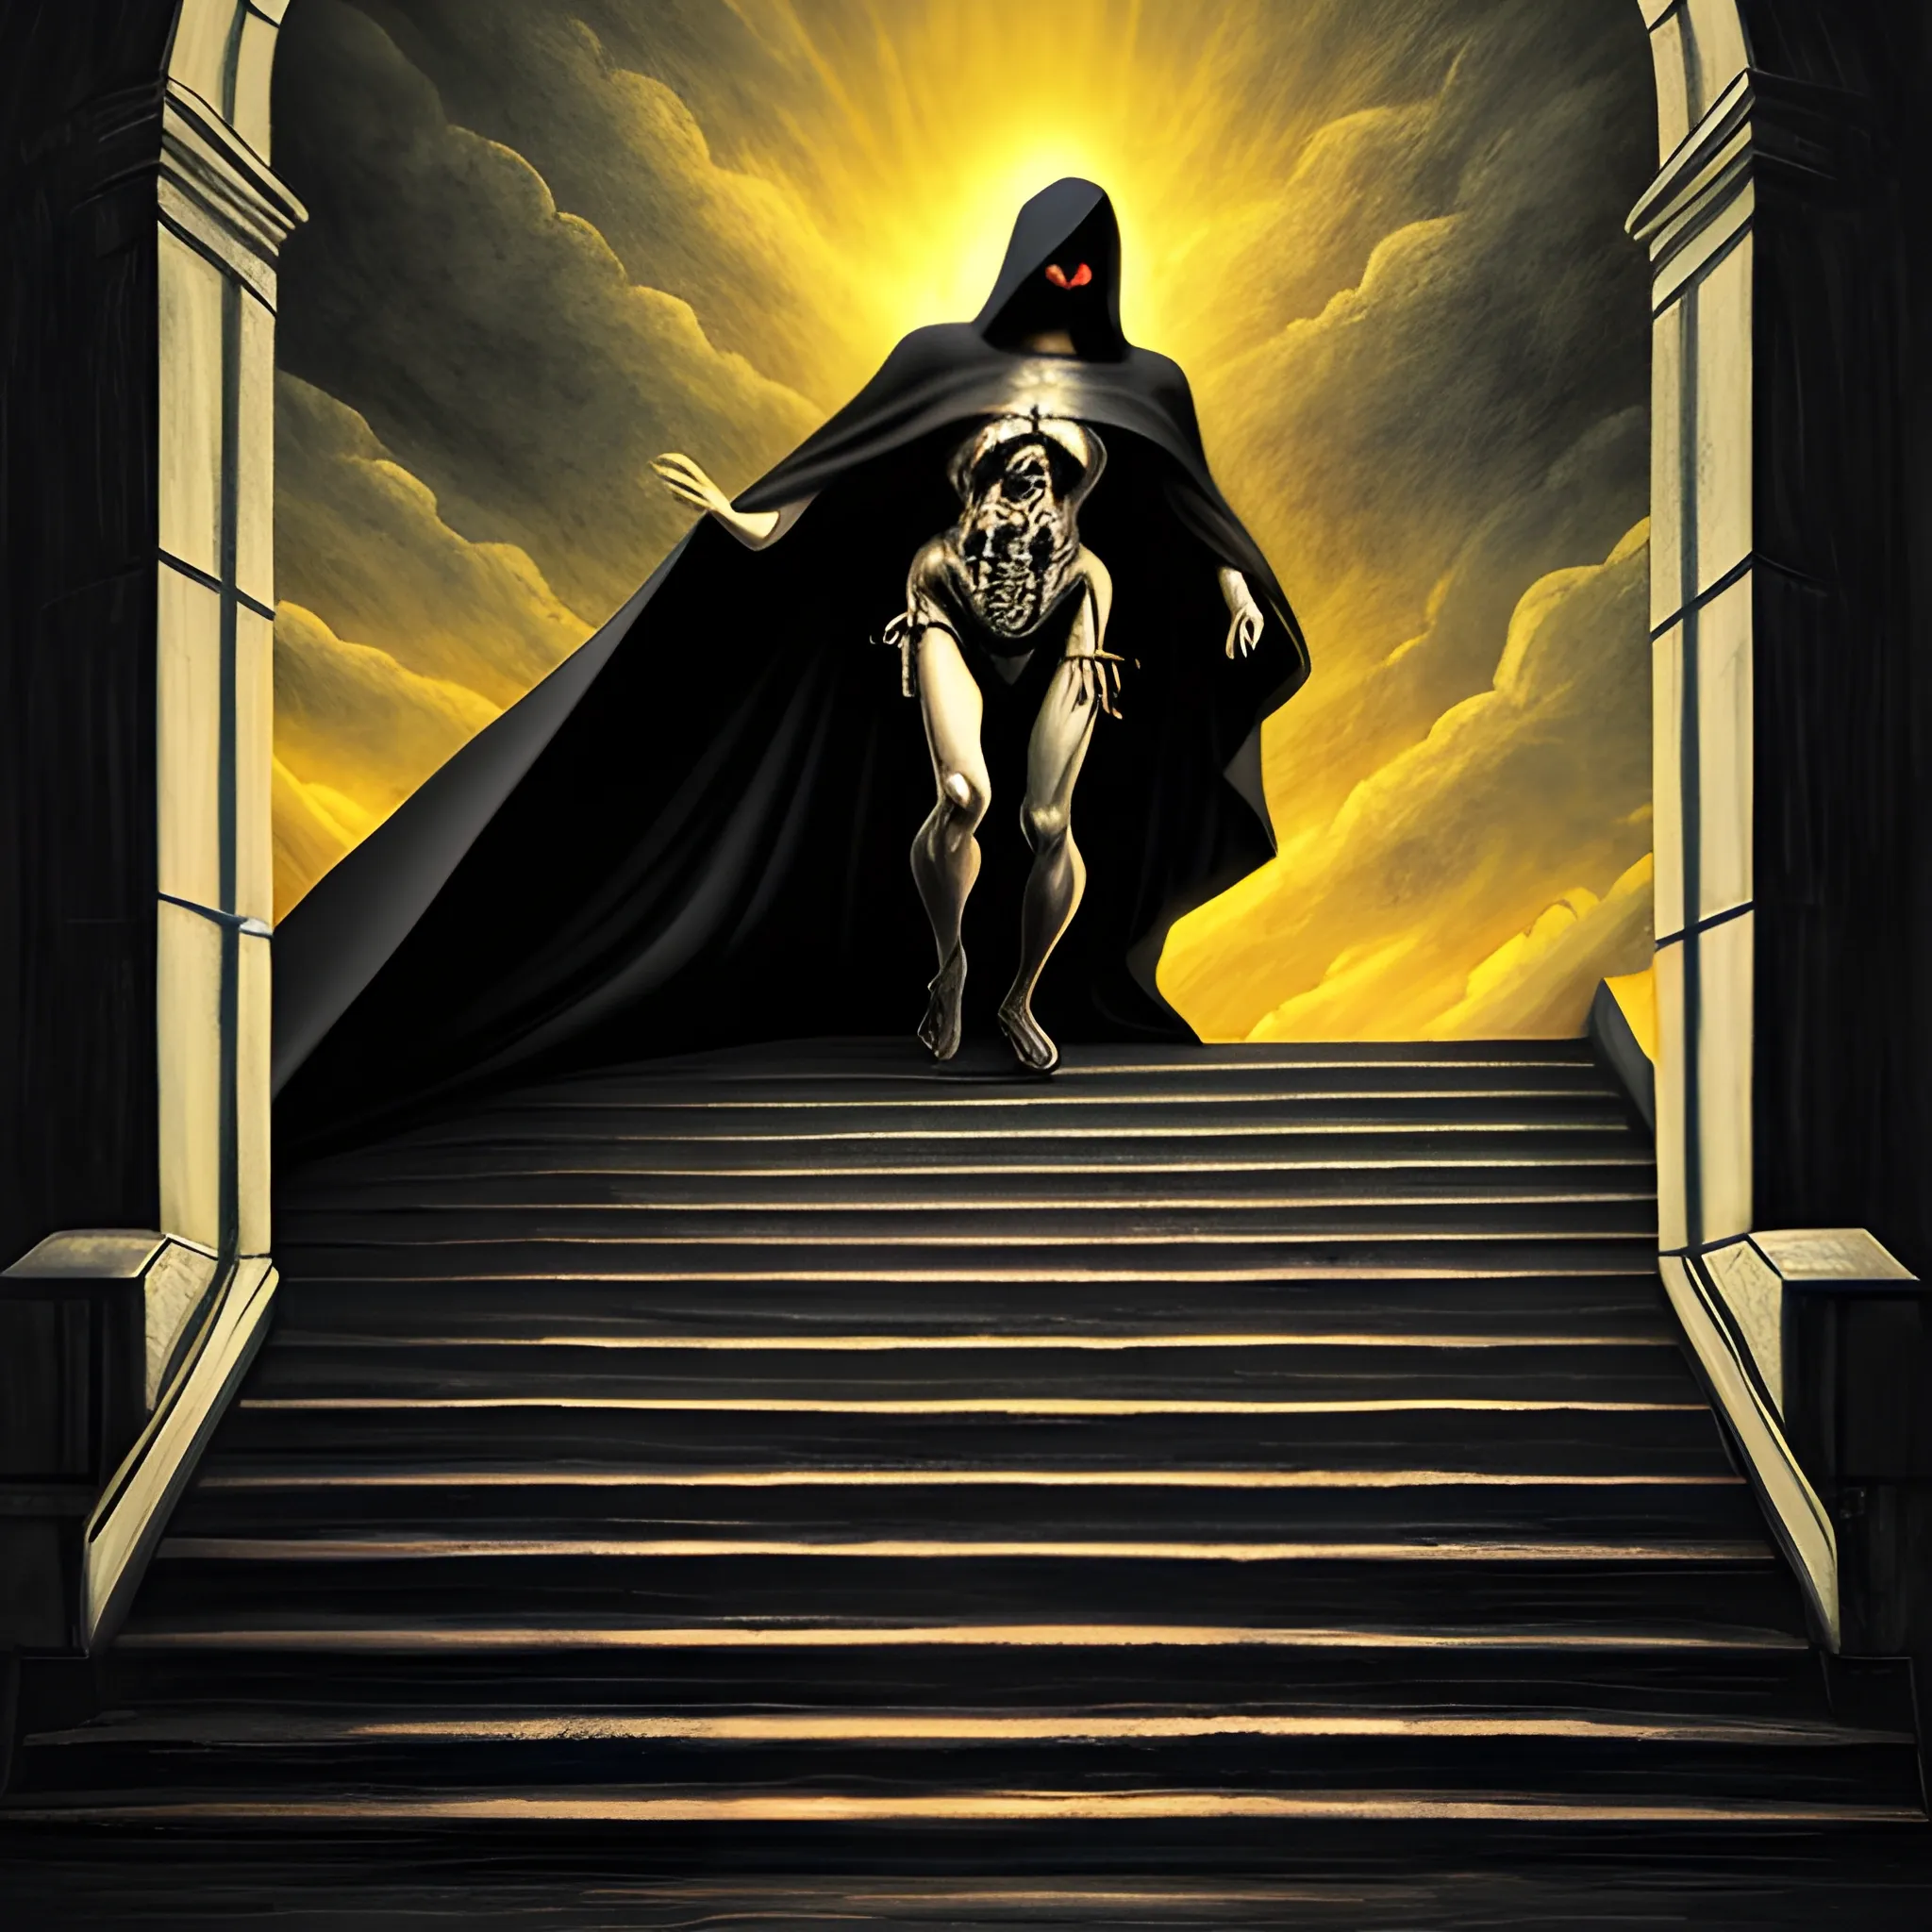 Death climbing the stairs to heaven on his back. Death has the cape and a black hood. The sky has many clouds and a flash of light, and the doors are golden. Realistic